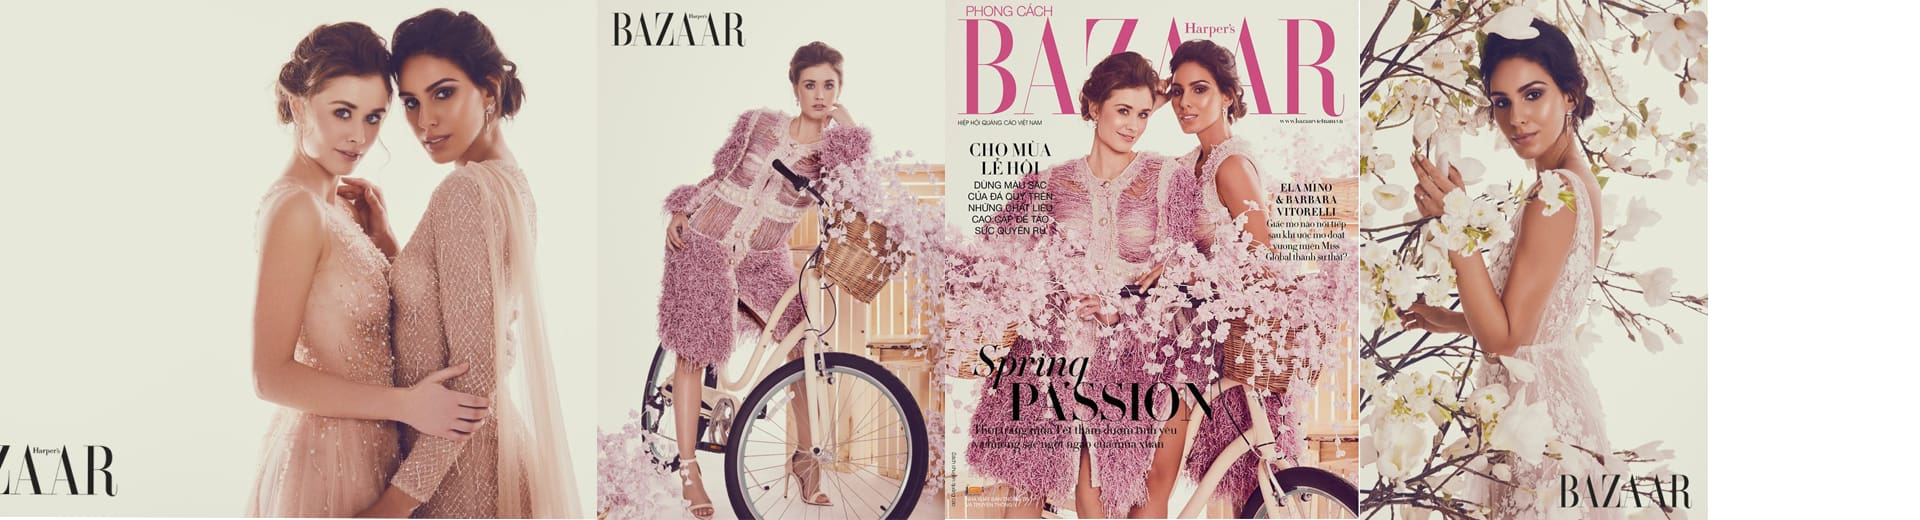 Four magazine covers featuring a woman in elegant dresses with floral and pastel themes, each titled "bazaar," emphasizing spring fashion.